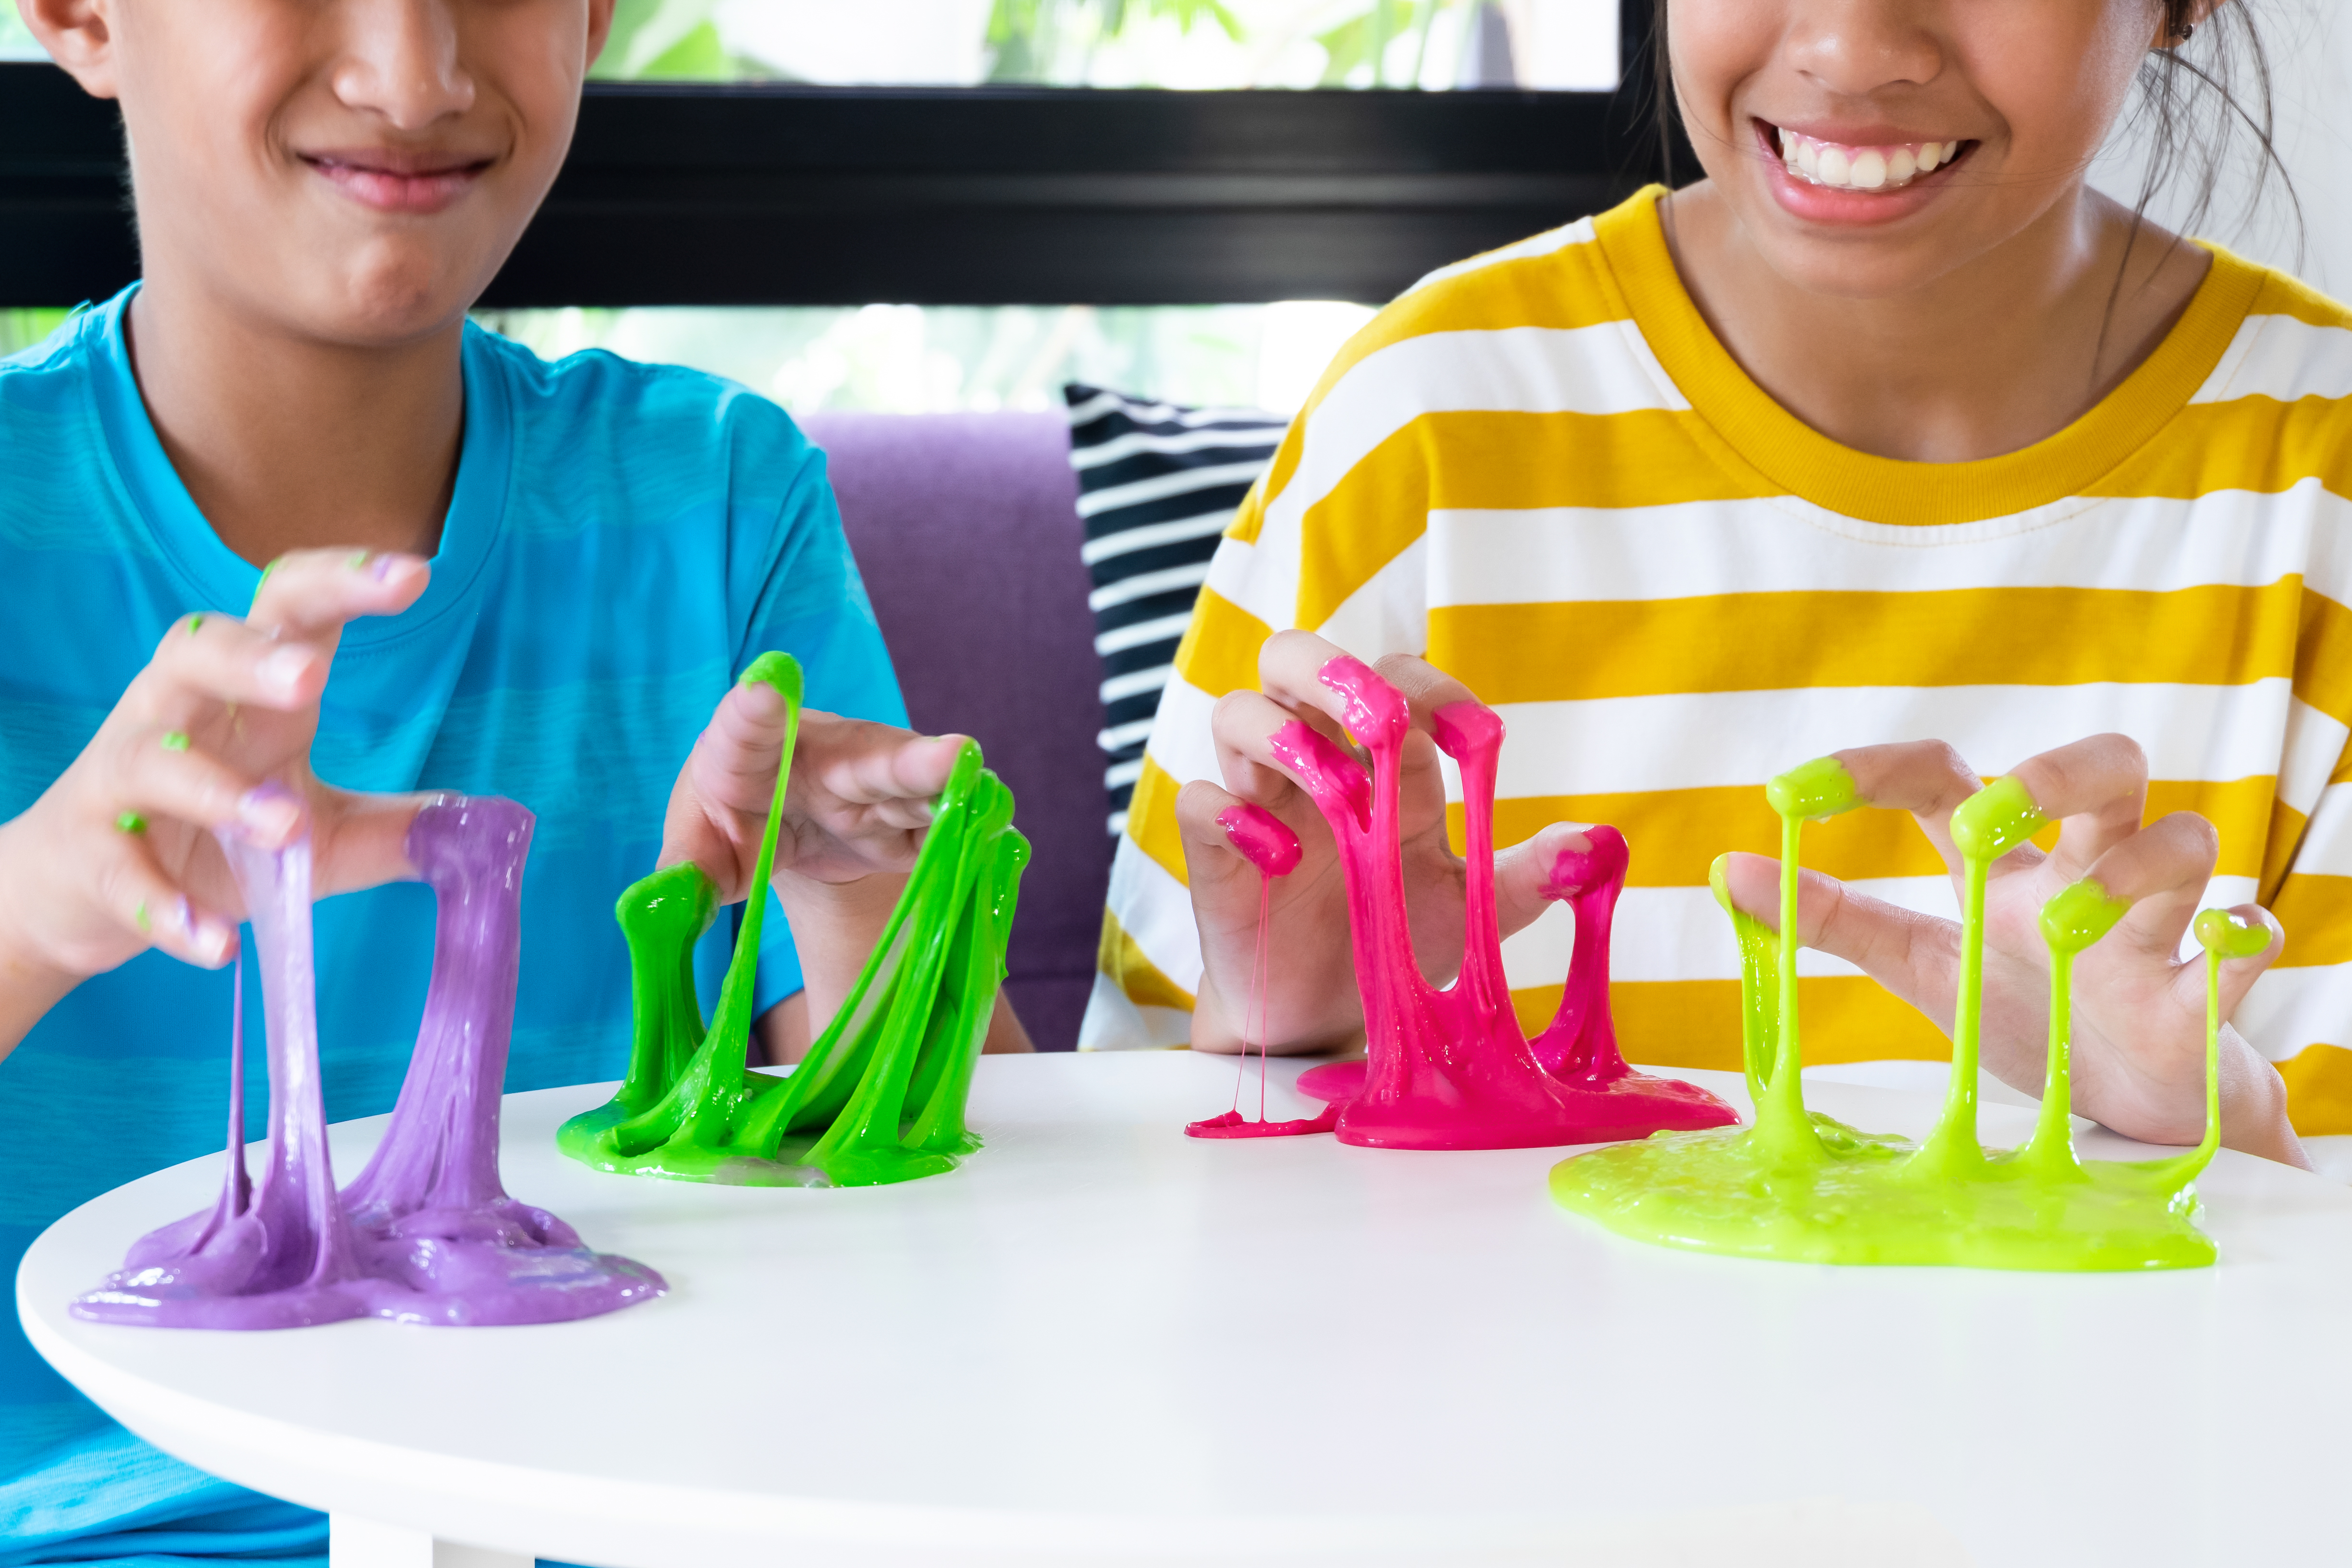 Two children playing with slime.